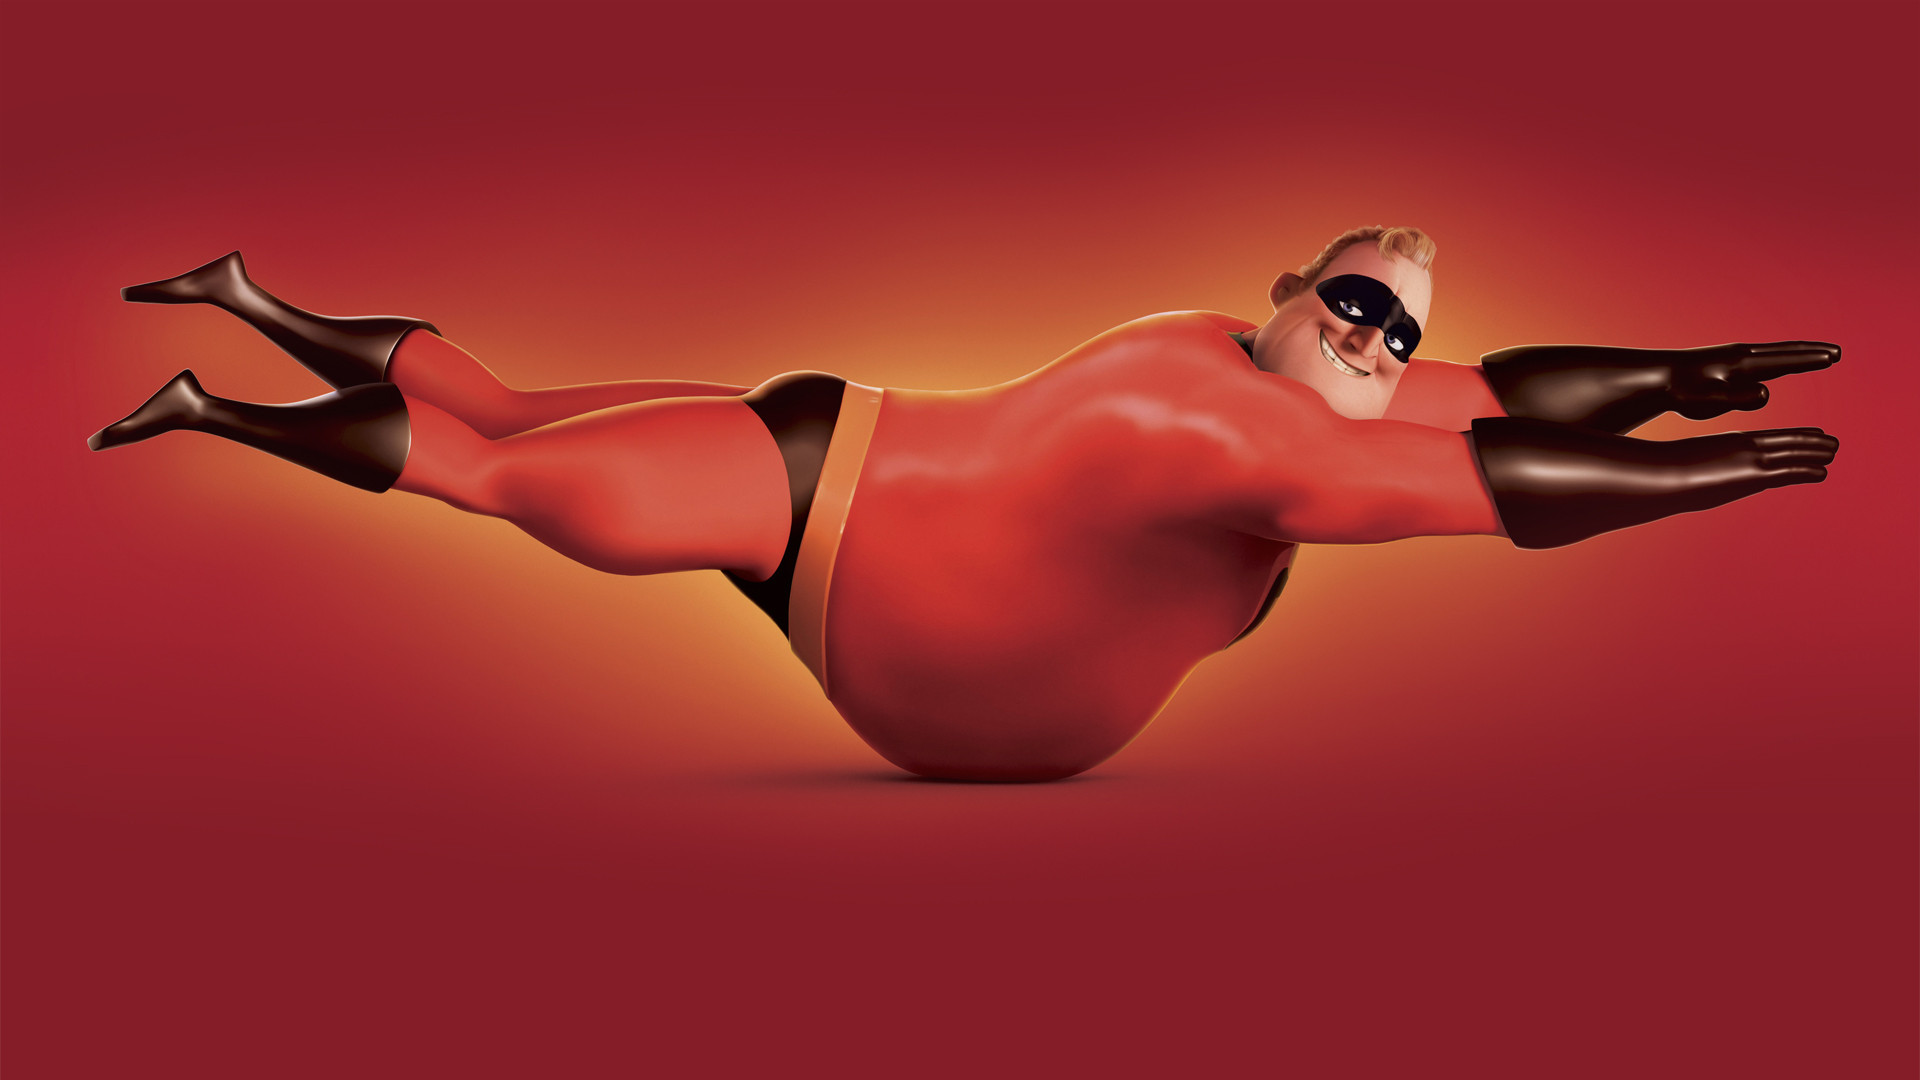 The Incredibles Cartoon Full HD Background For Macbook Cartoons